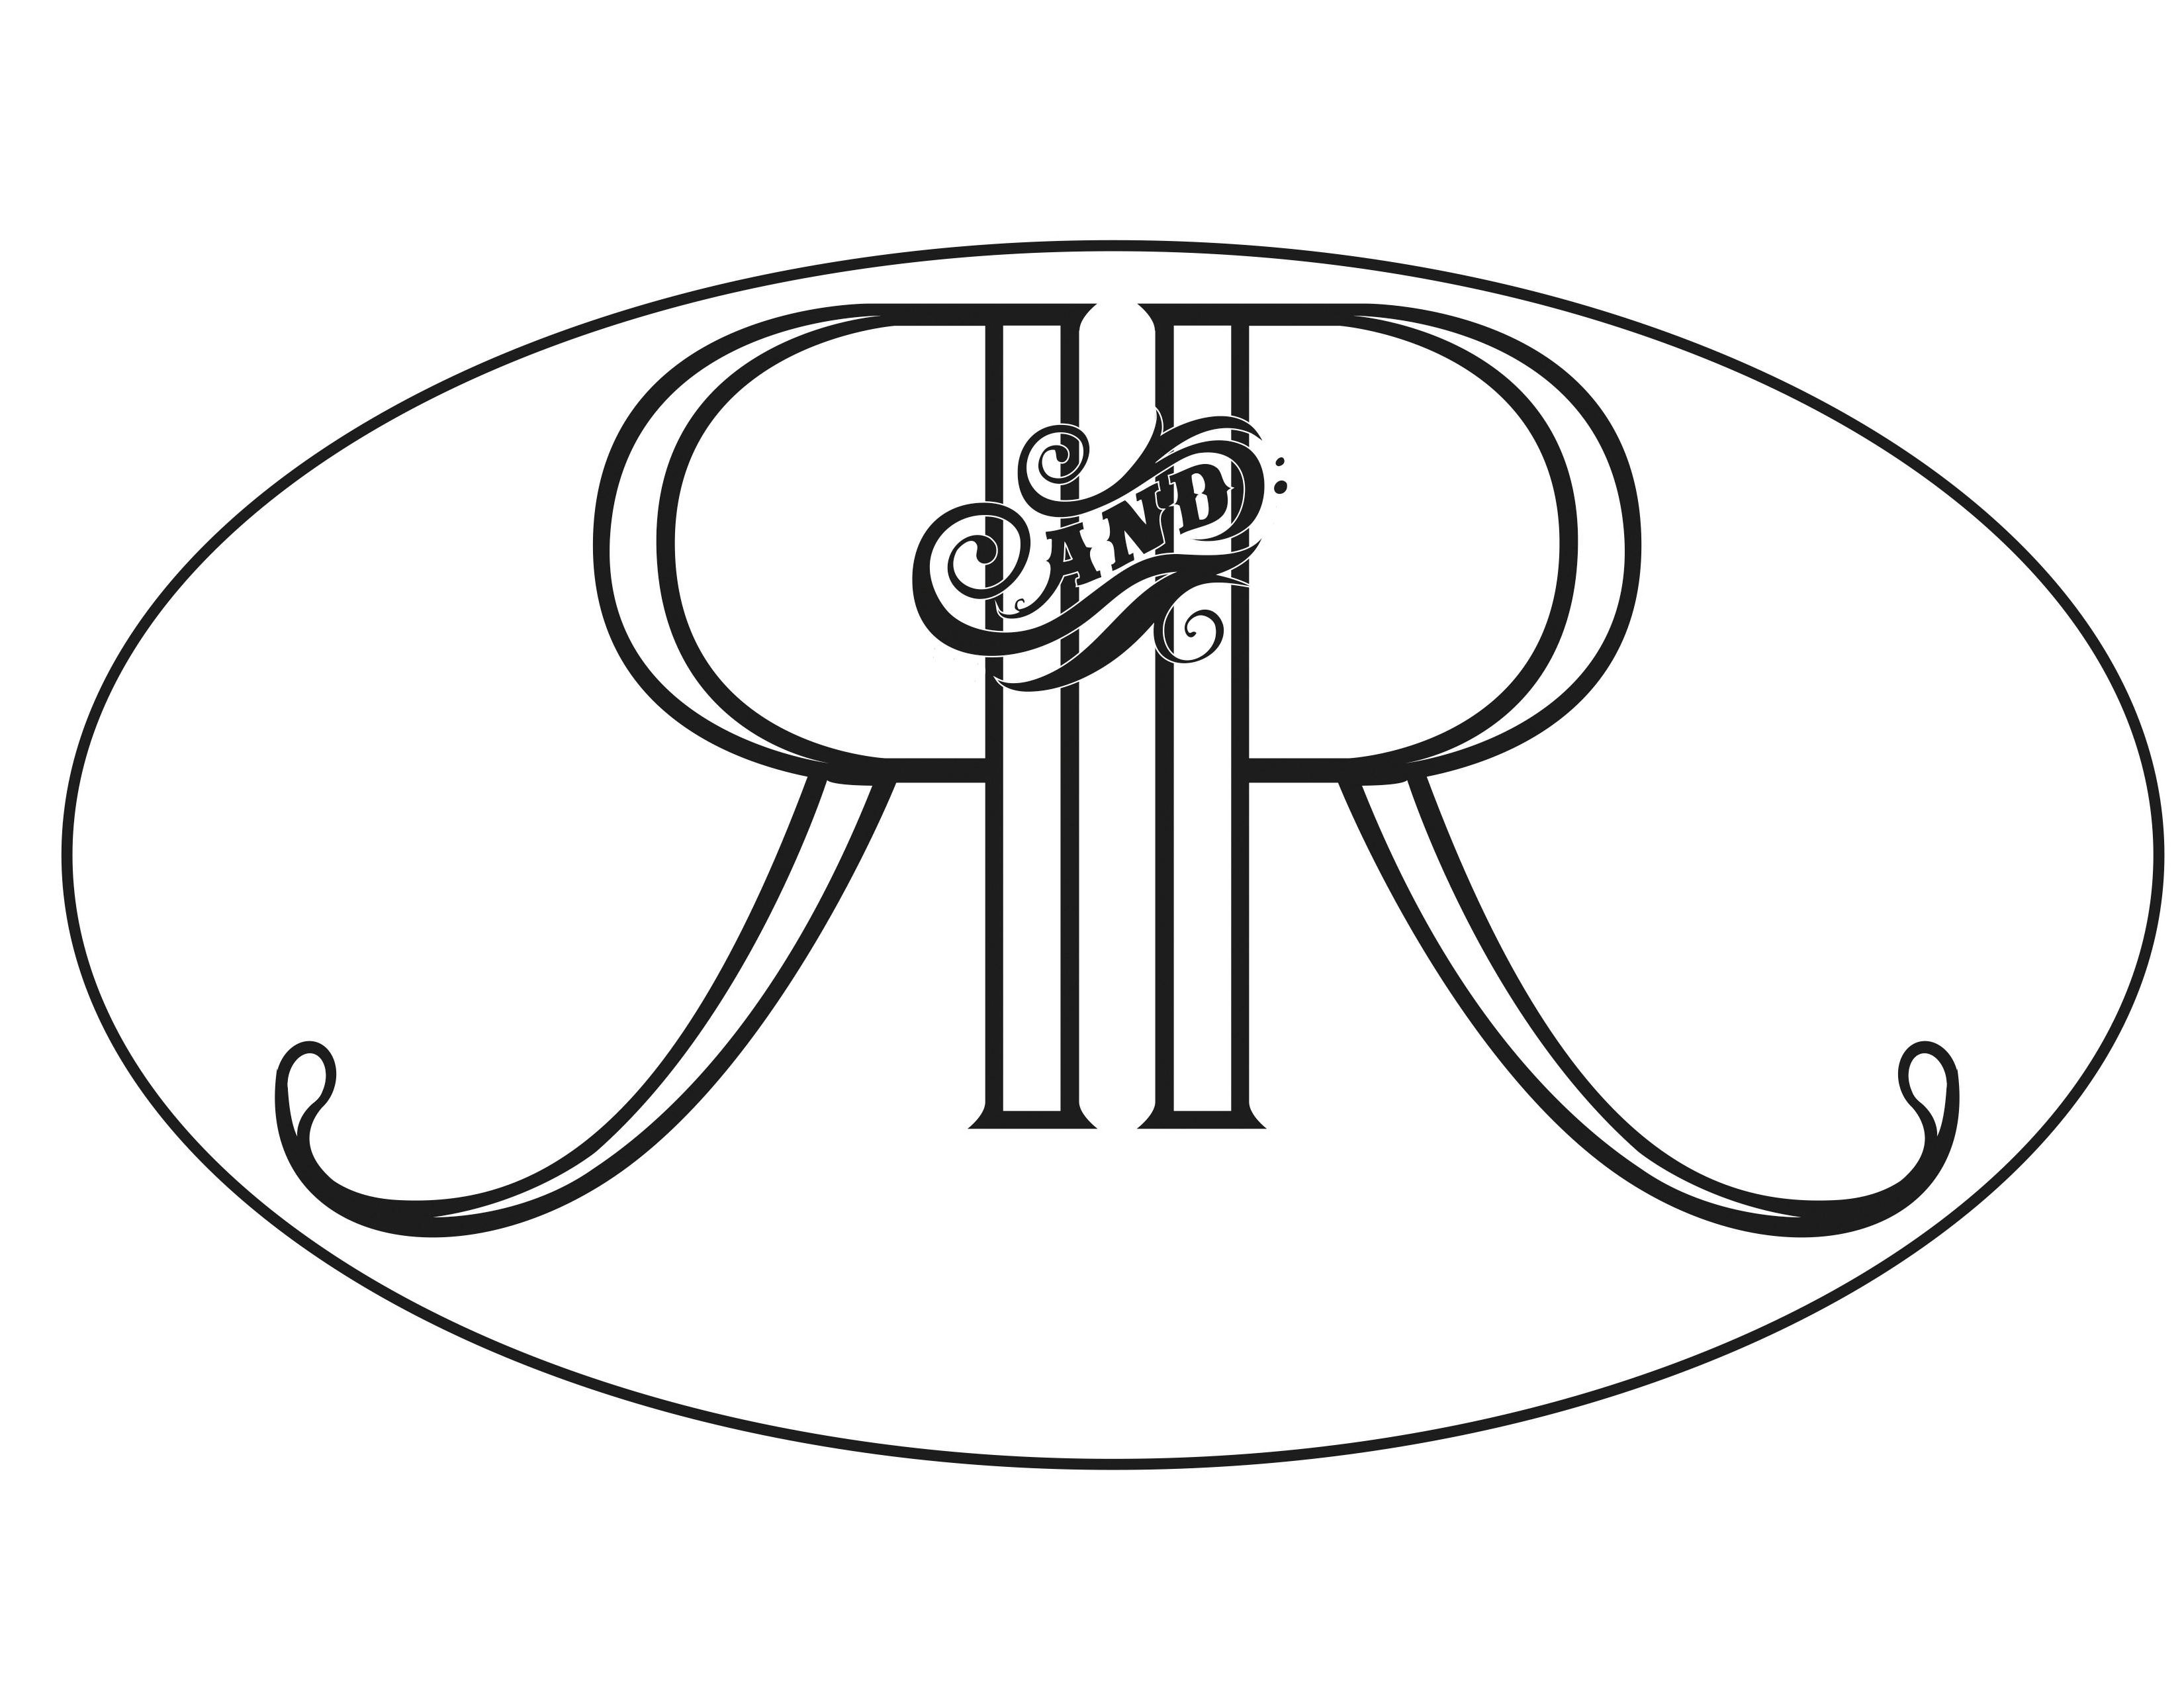 R AND R